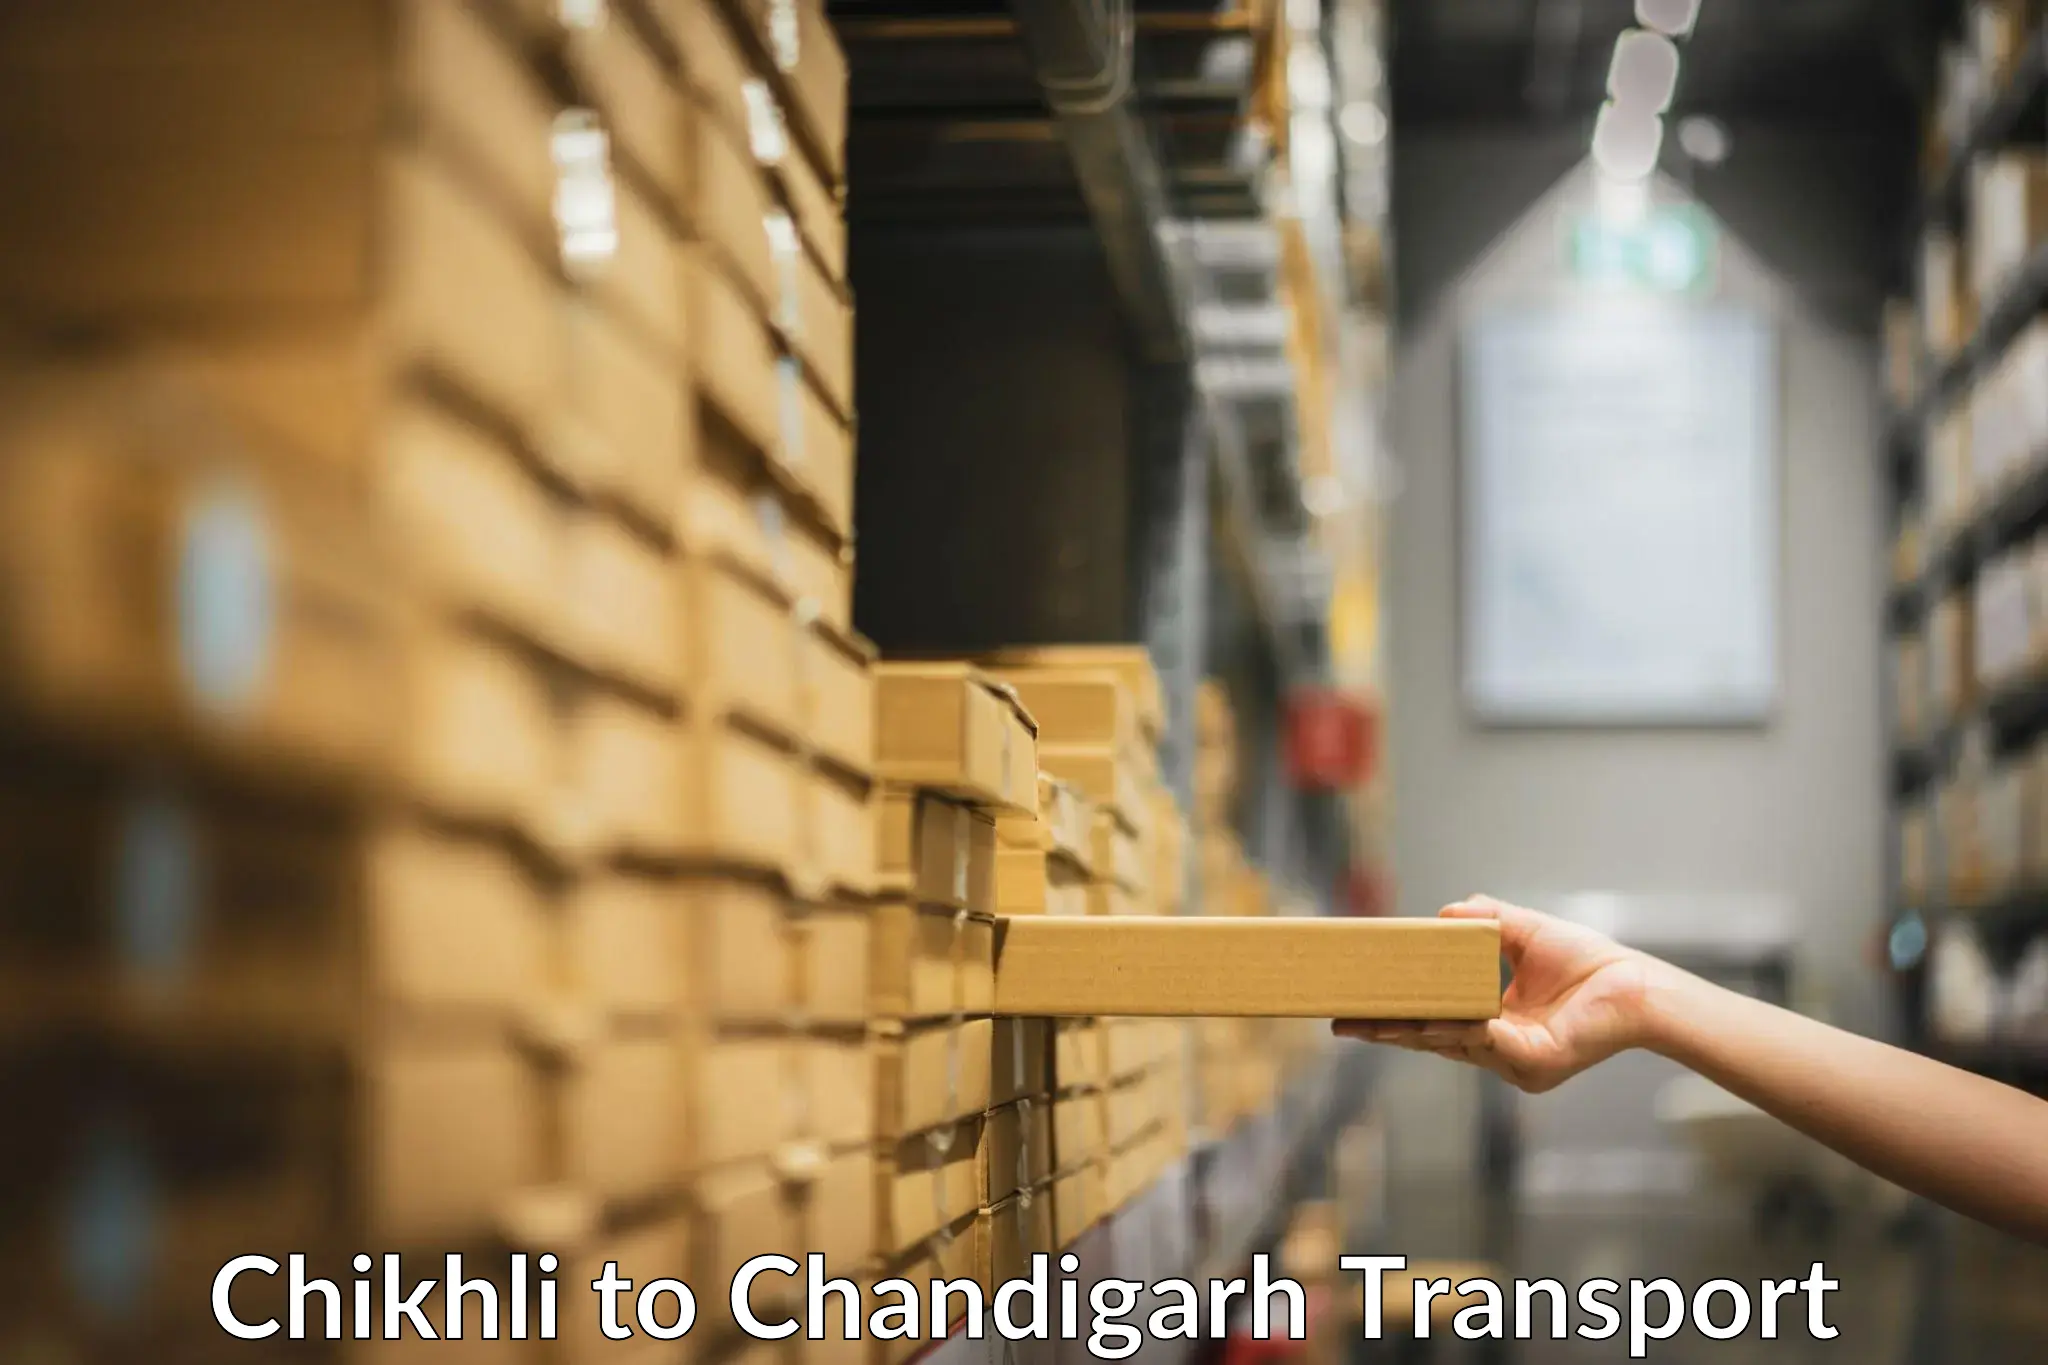 Container transport service Chikhli to Chandigarh